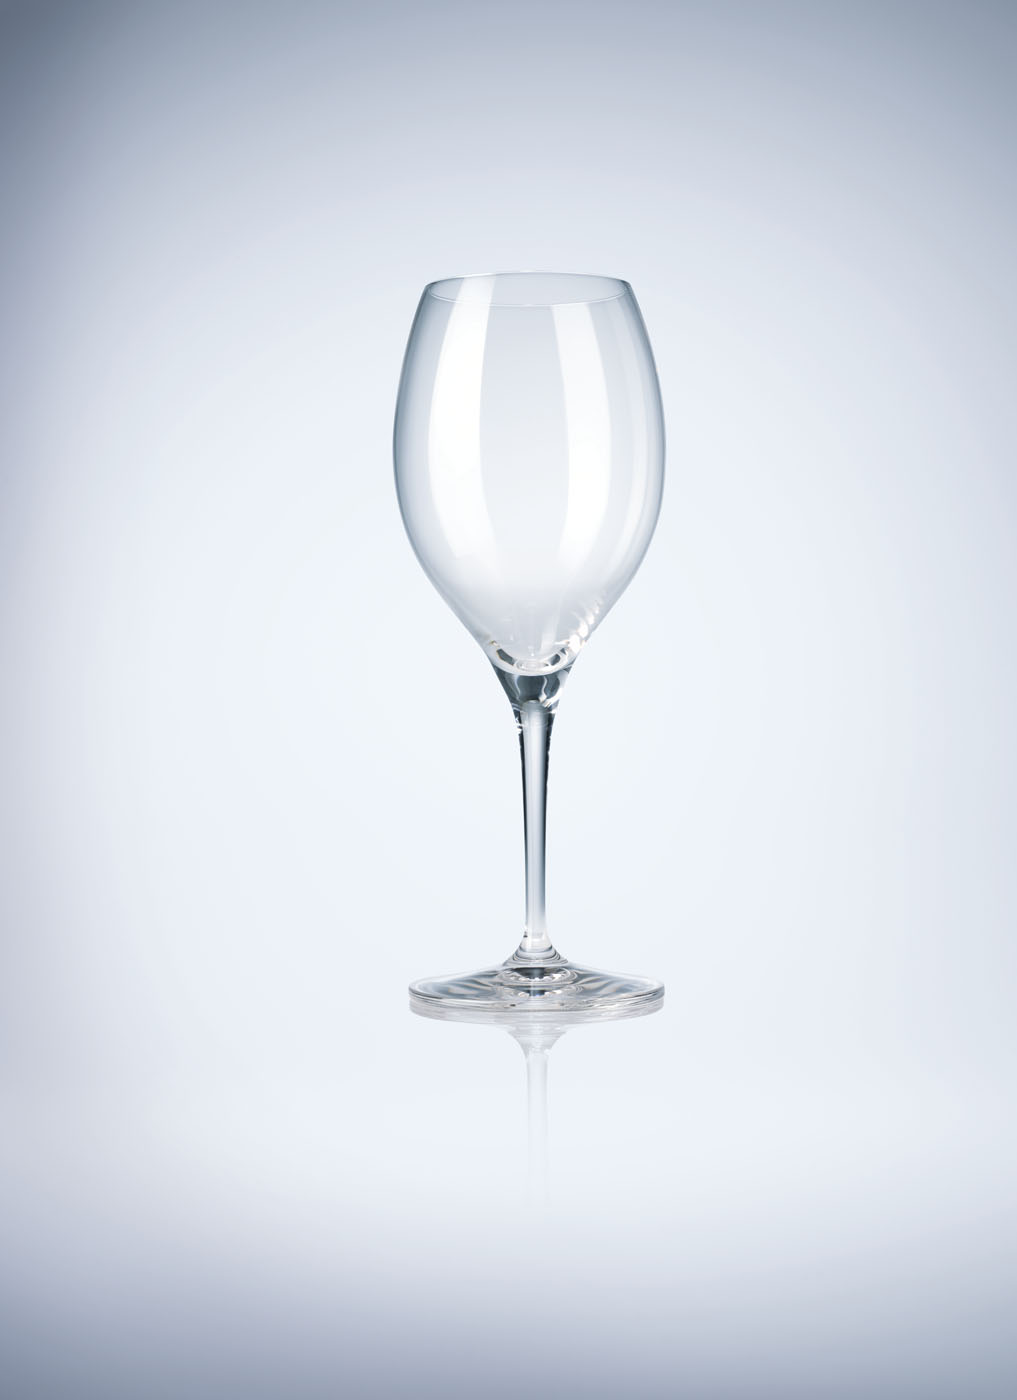 Wine glass in studio by Alexander Kent London based still life and product photographer.